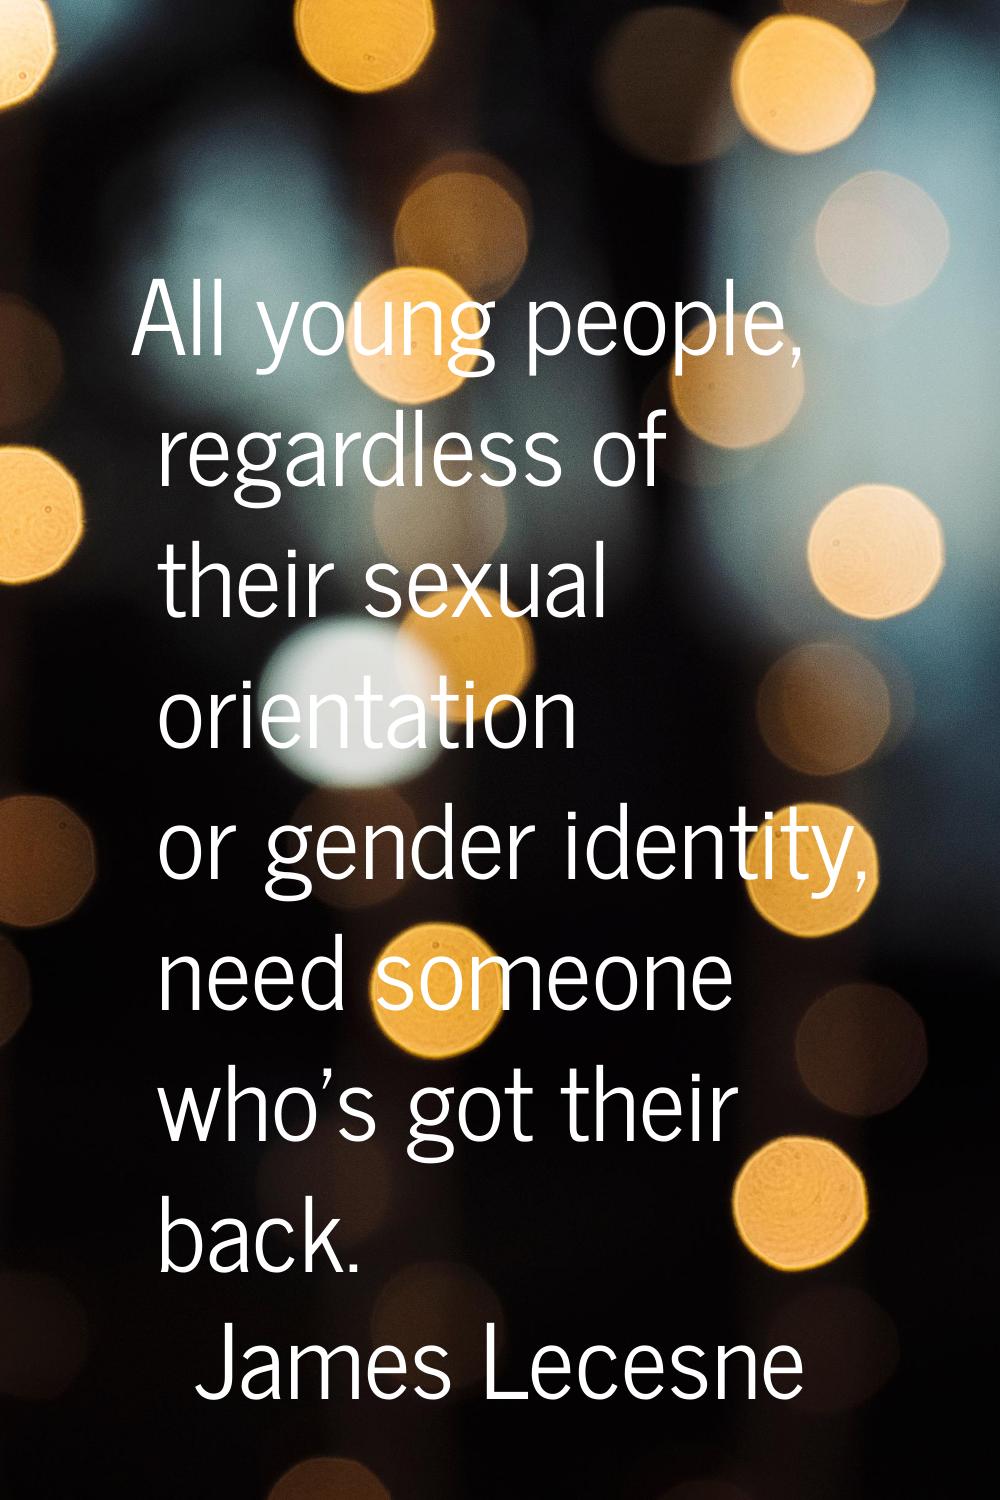 All young people, regardless of their sexual orientation or gender identity, need someone who's got